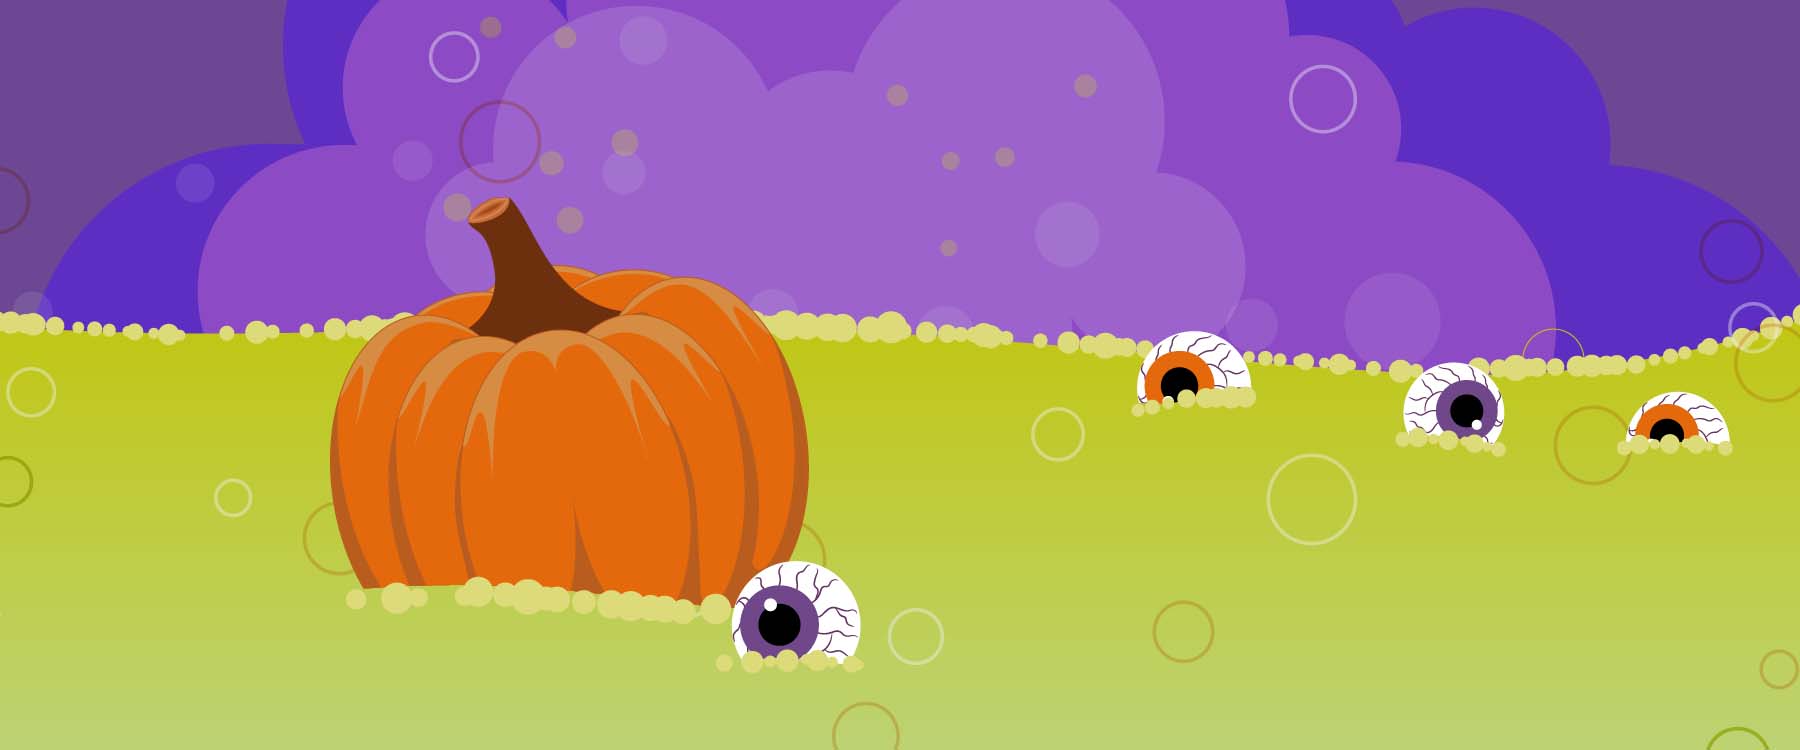 An illustrated pumpkin in a green sea of eyeballs. Above are purple plumes of cloud.